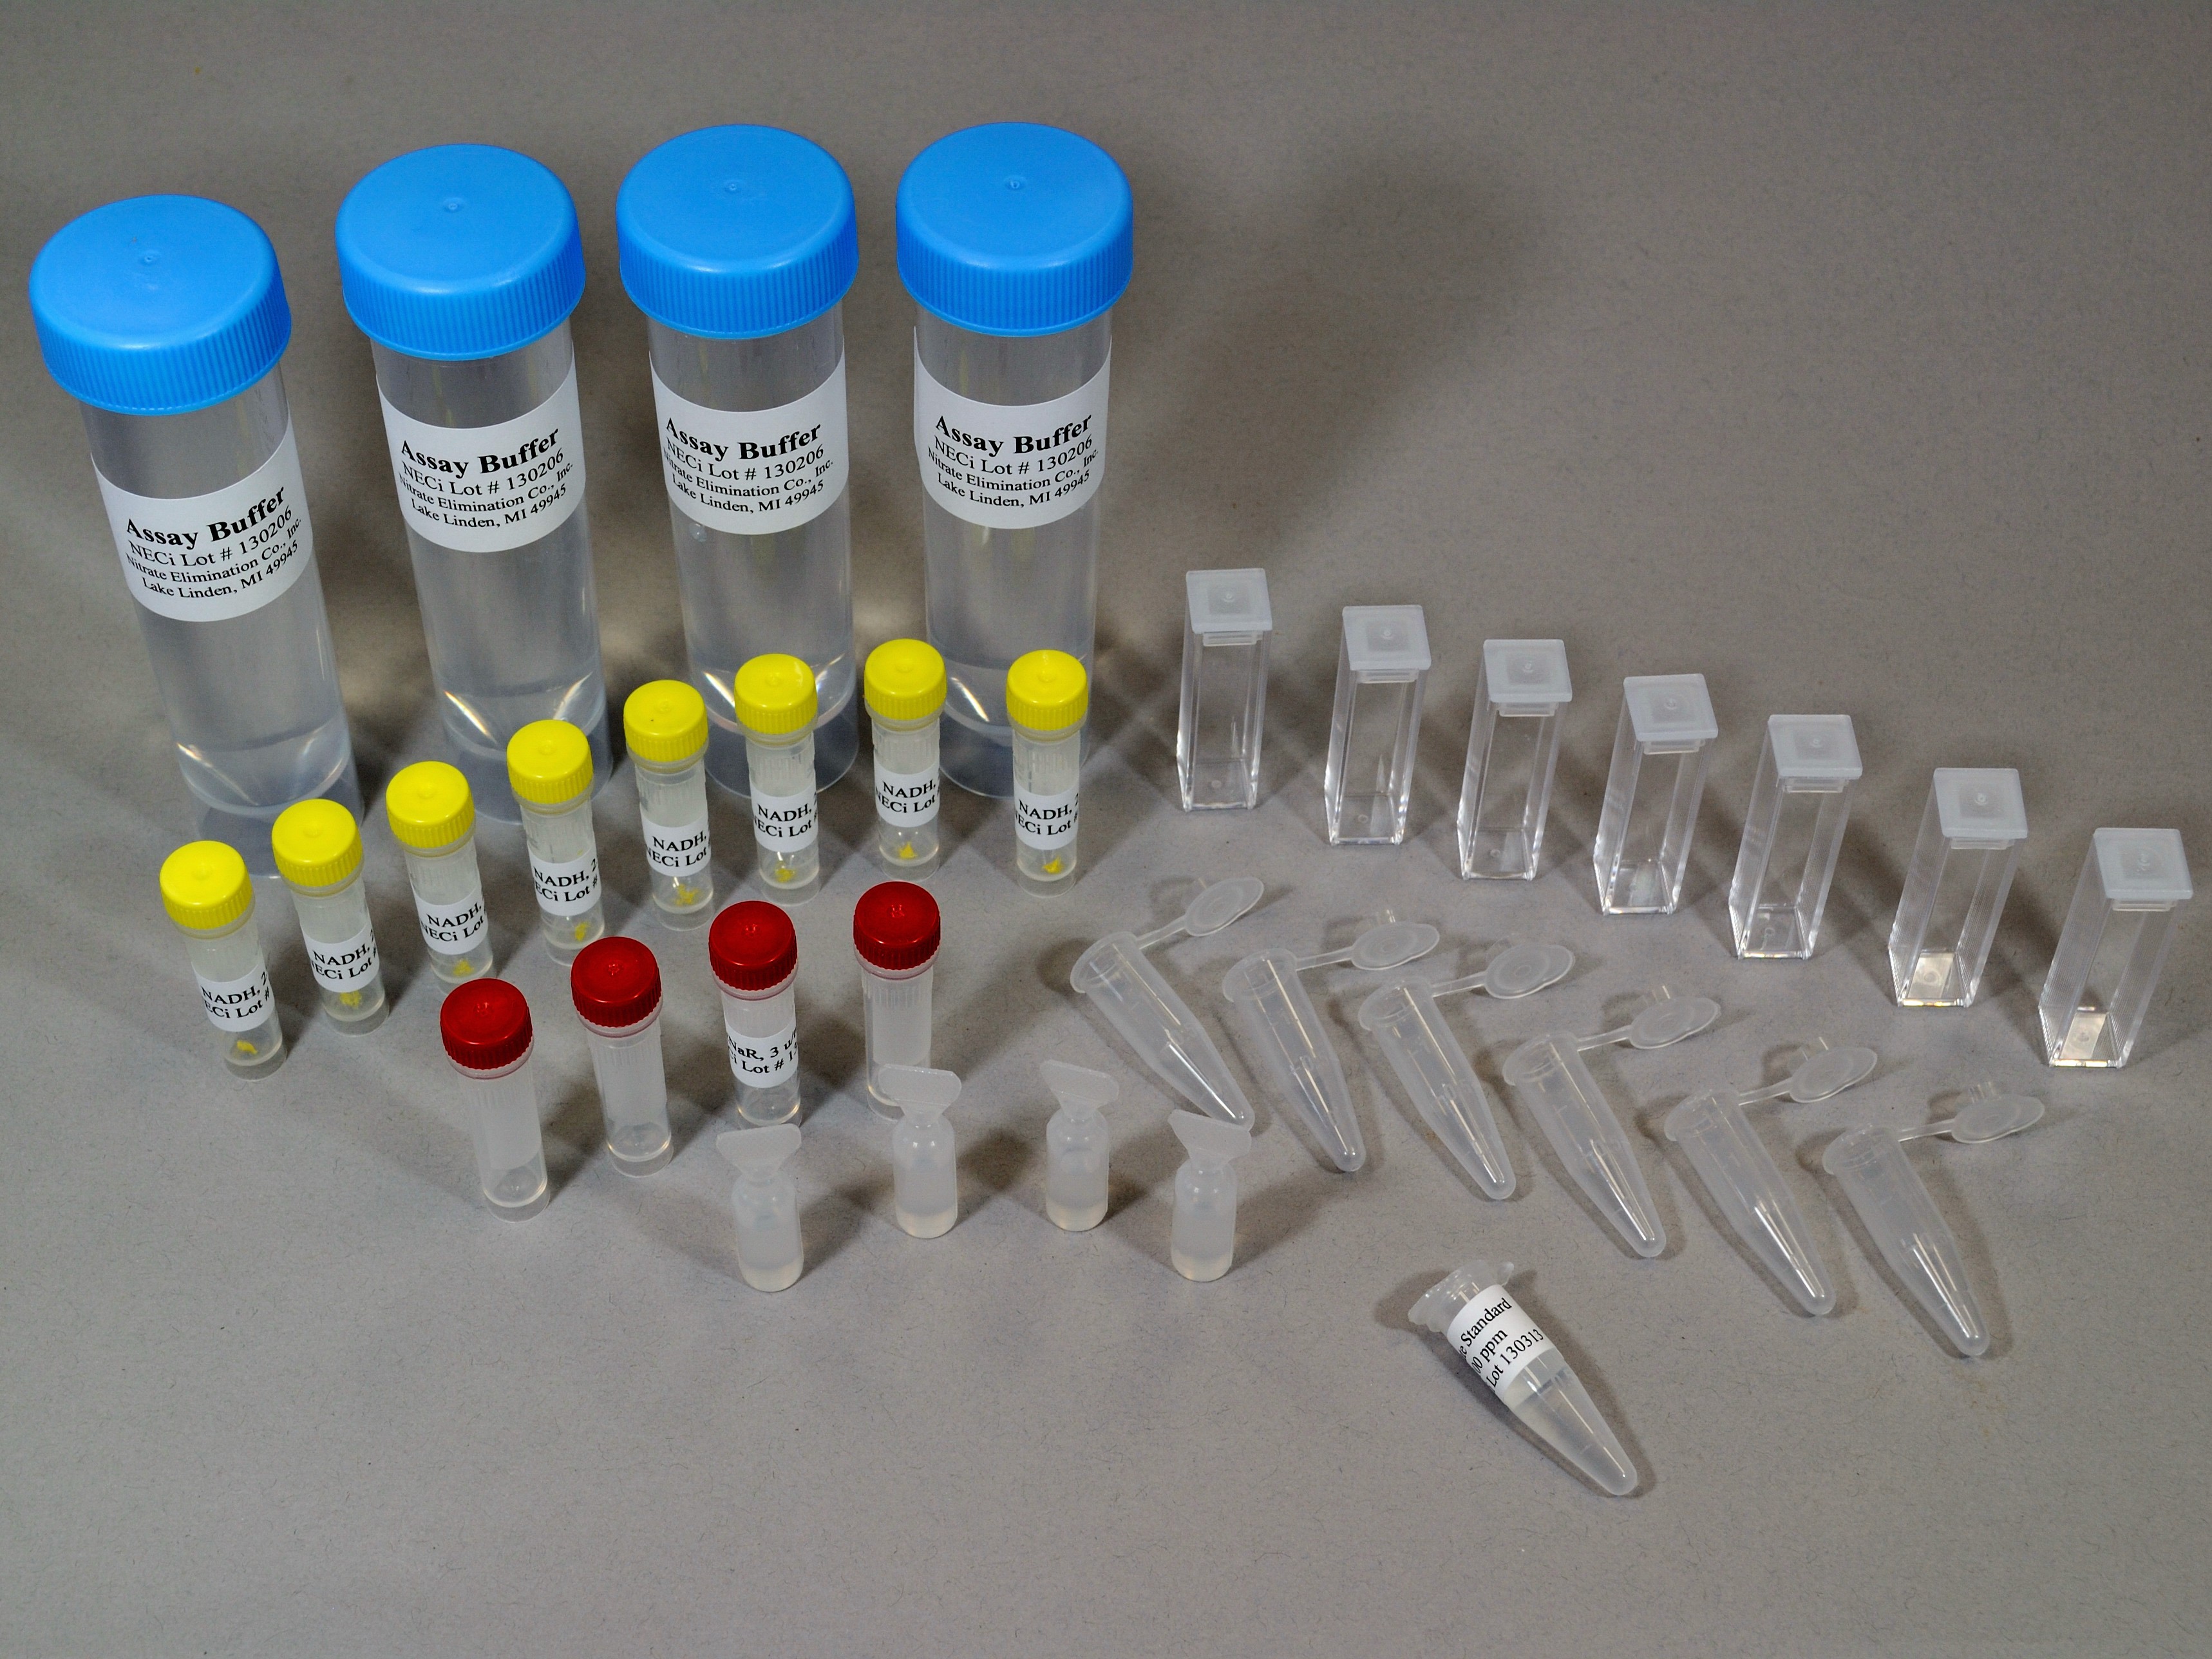 Nitrate Test Kit by NADH Disappearance: 100 Sample Analysis